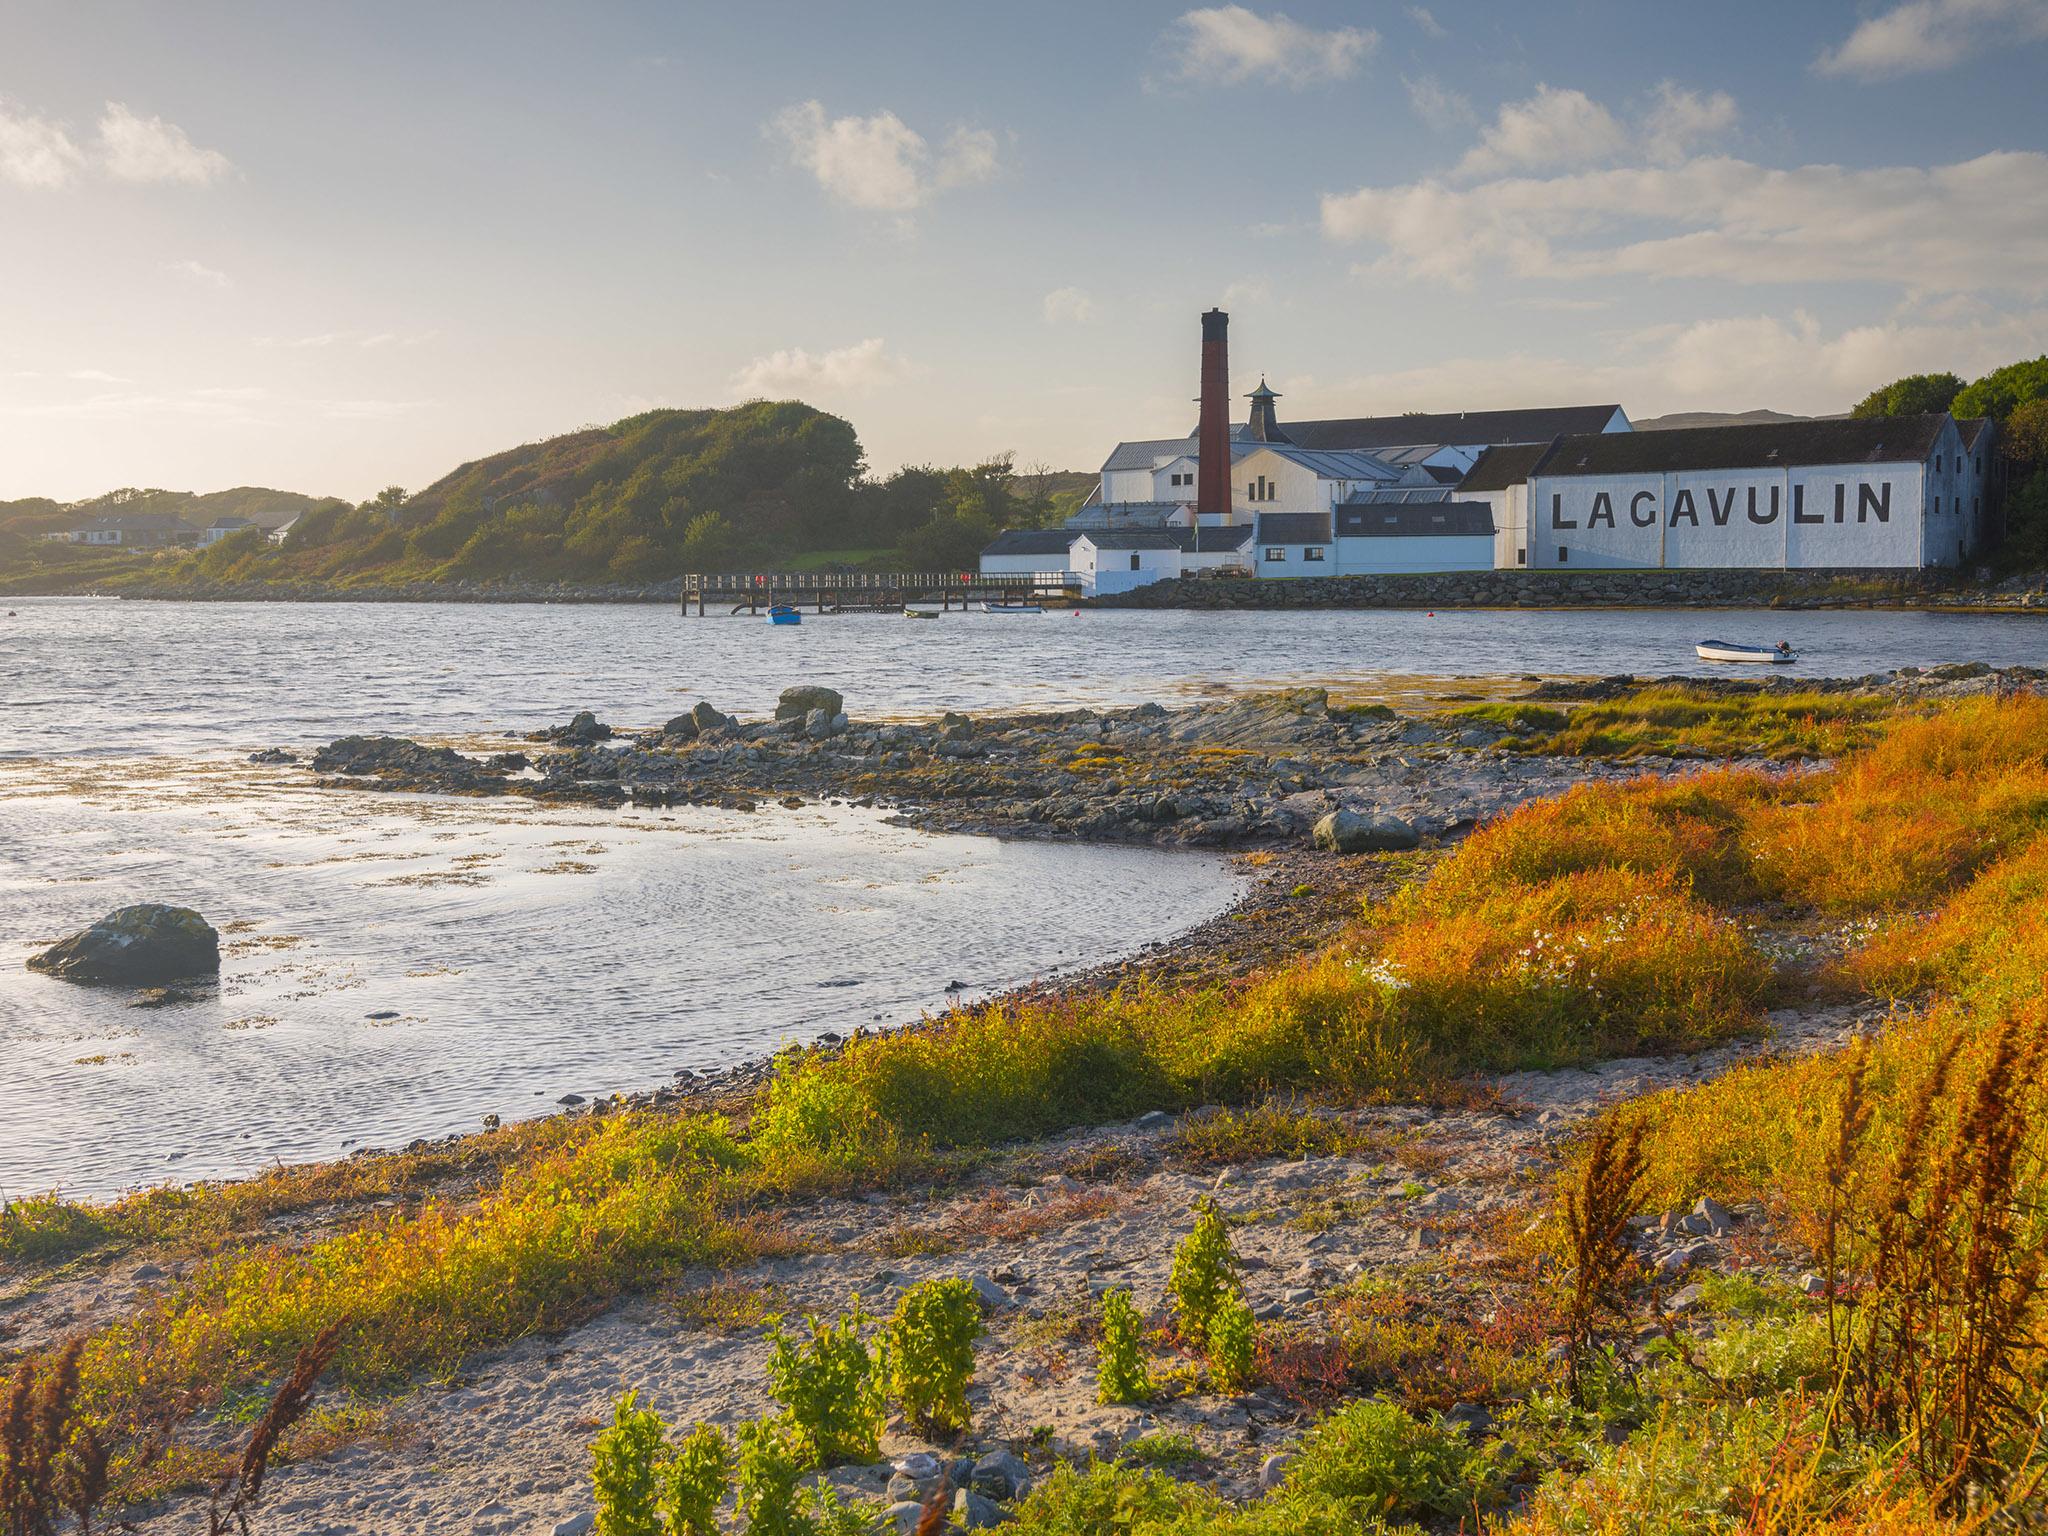 Lagavulin Distillery is one of two on Islay owned by Diageo, the world's largest spirits producer